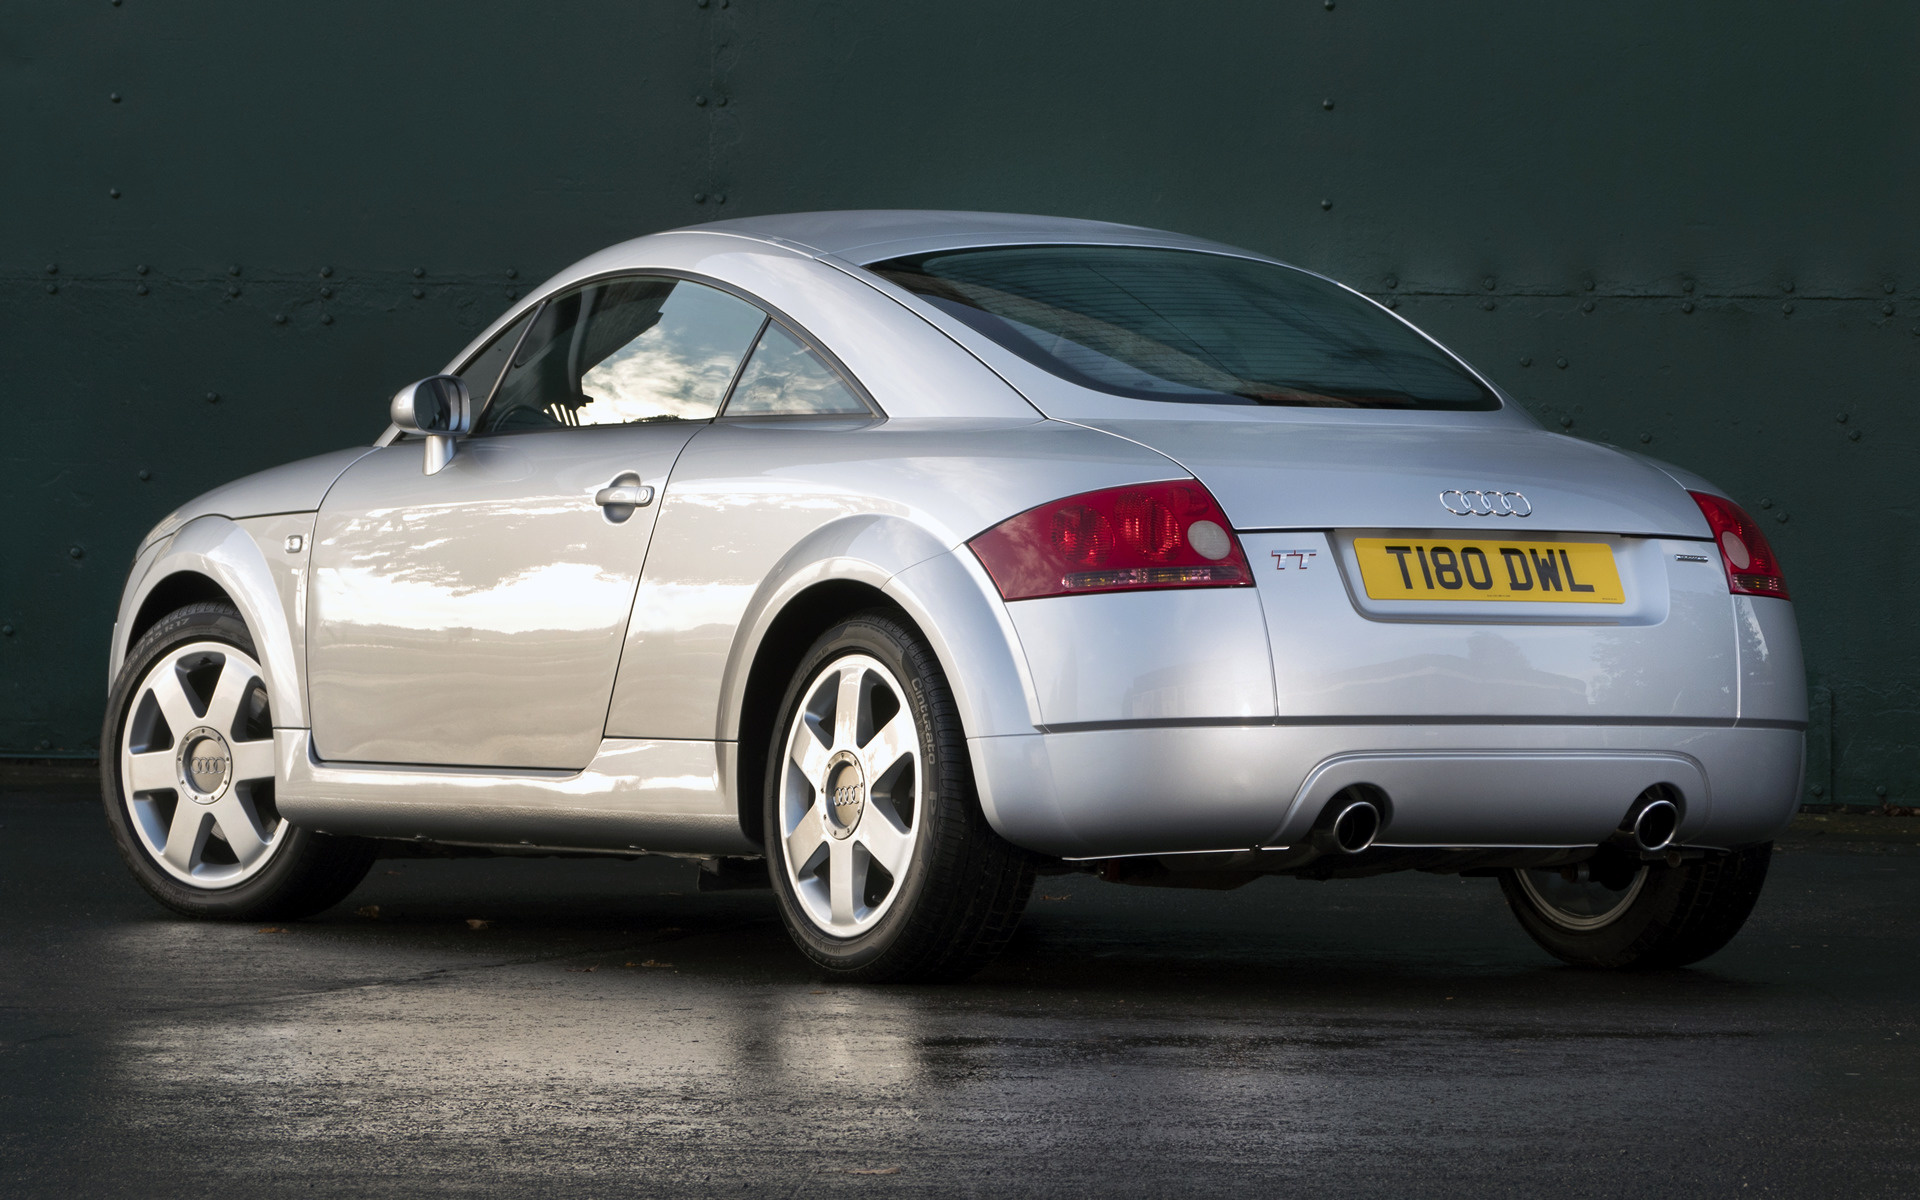 1998 Audi TT Coupe (UK) - Wallpapers and HD Images | Car Pixel